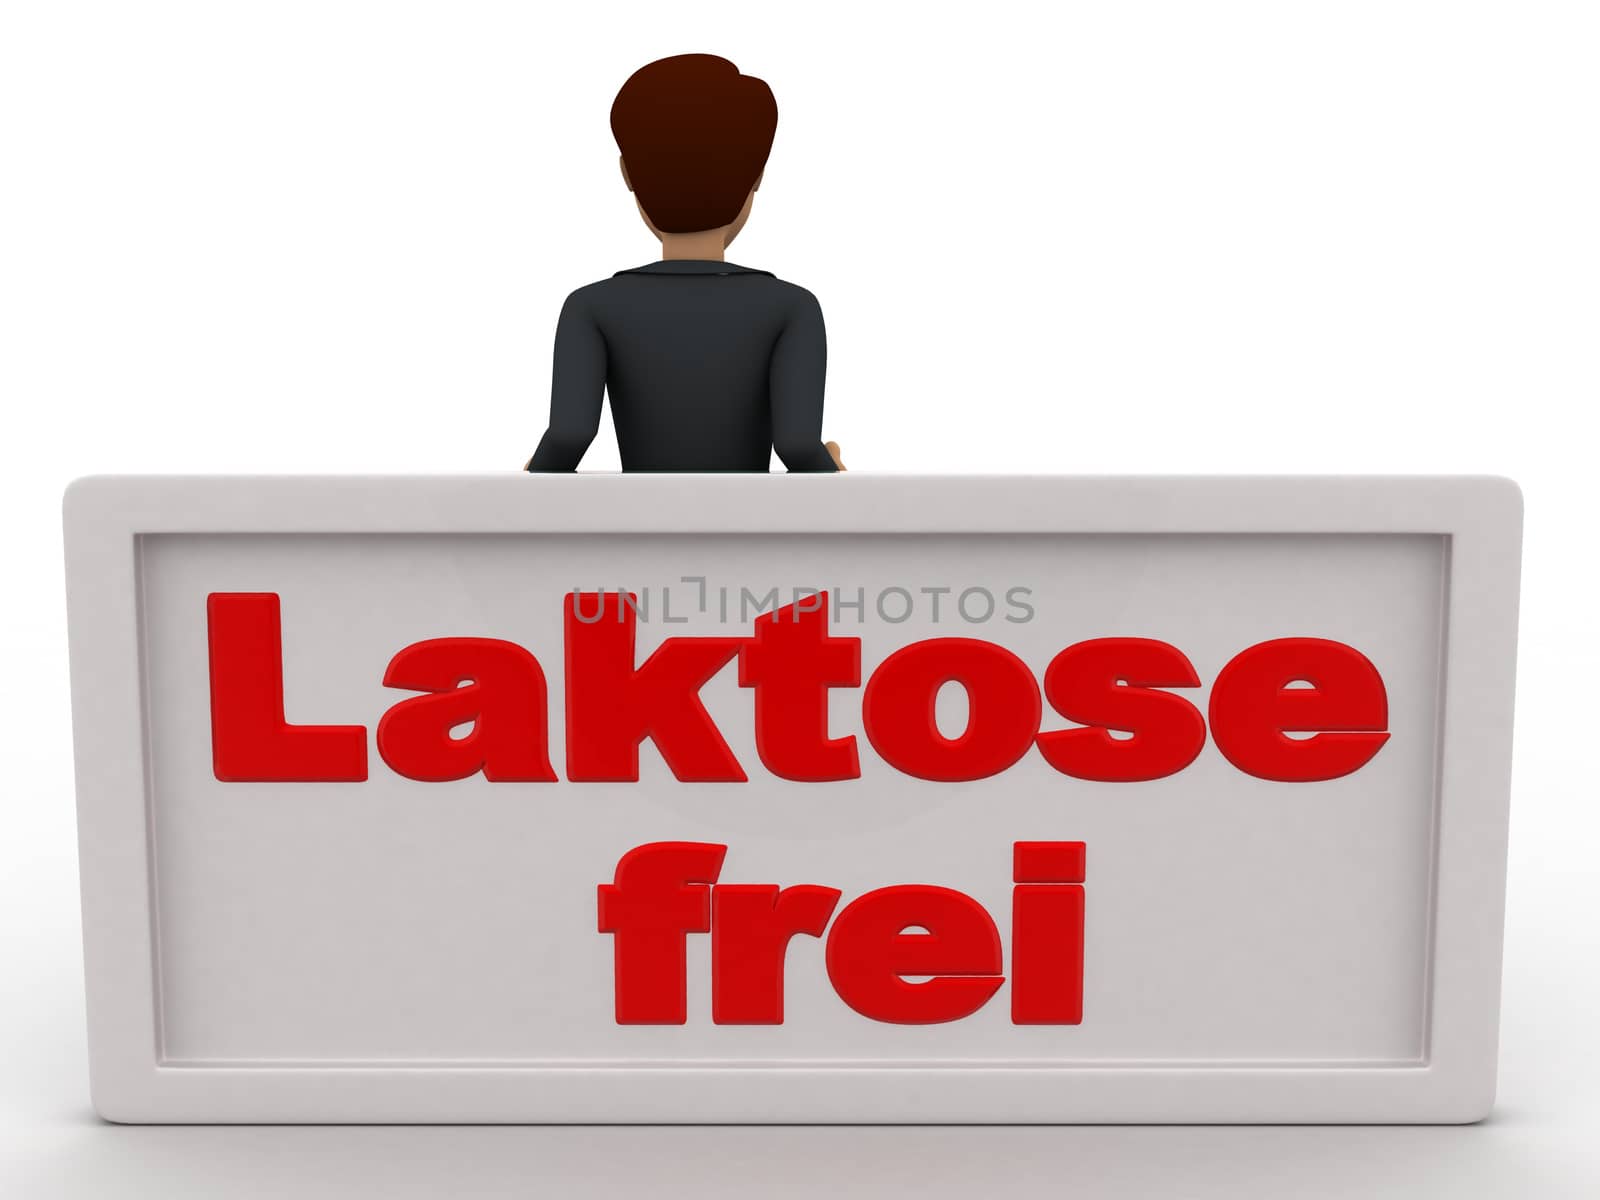 3d man leaning on lakstose frel board concept on white background, front angle view